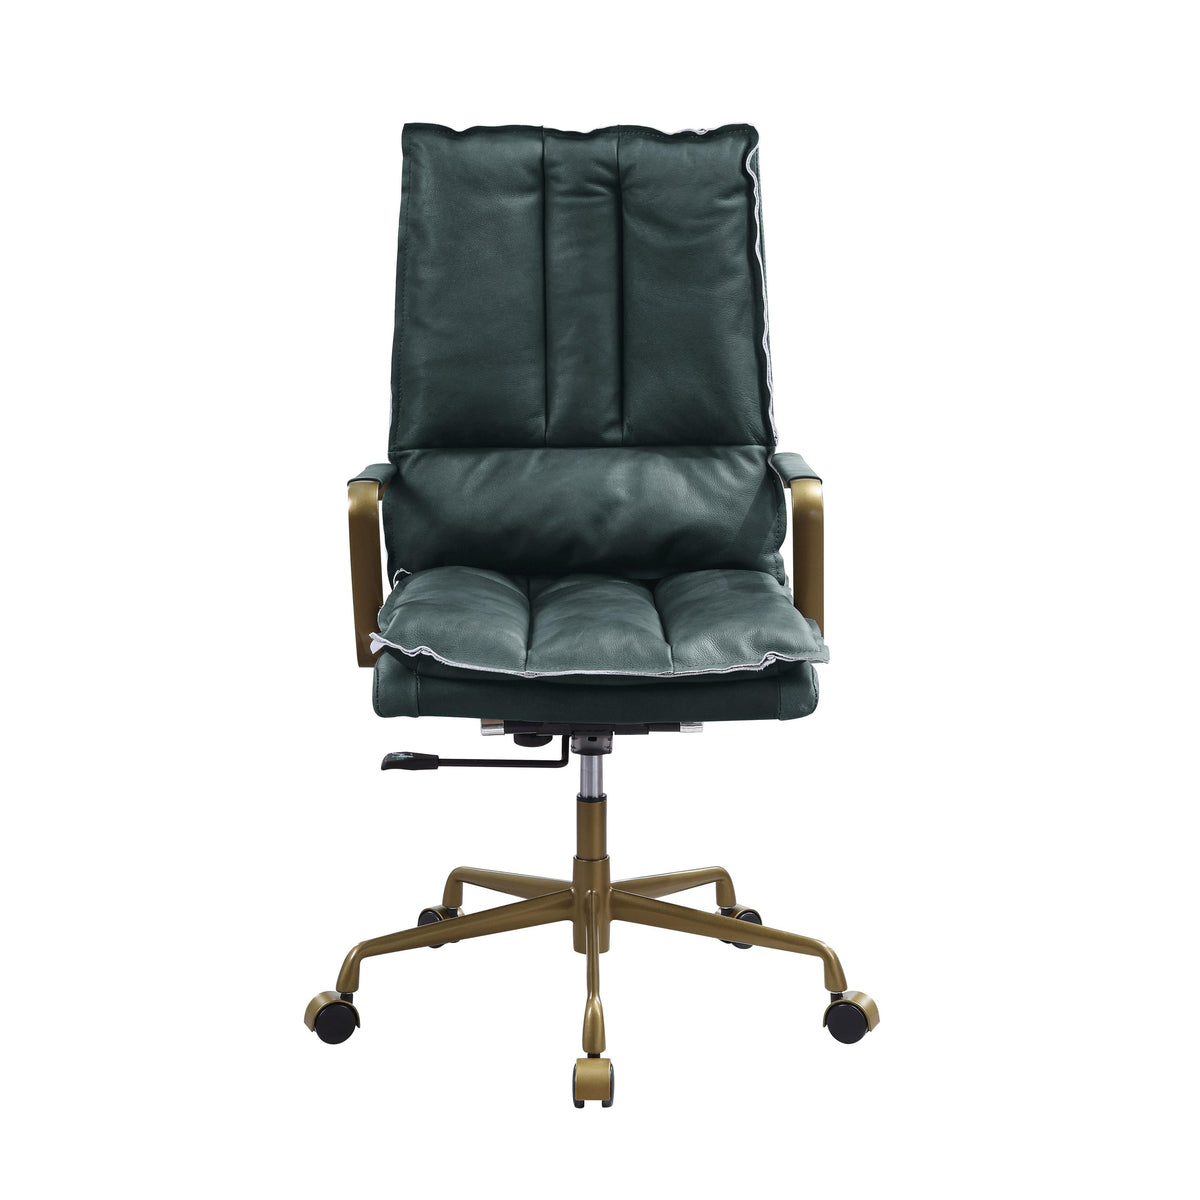 Acme Furniture Tinzud 93166 Office Chair